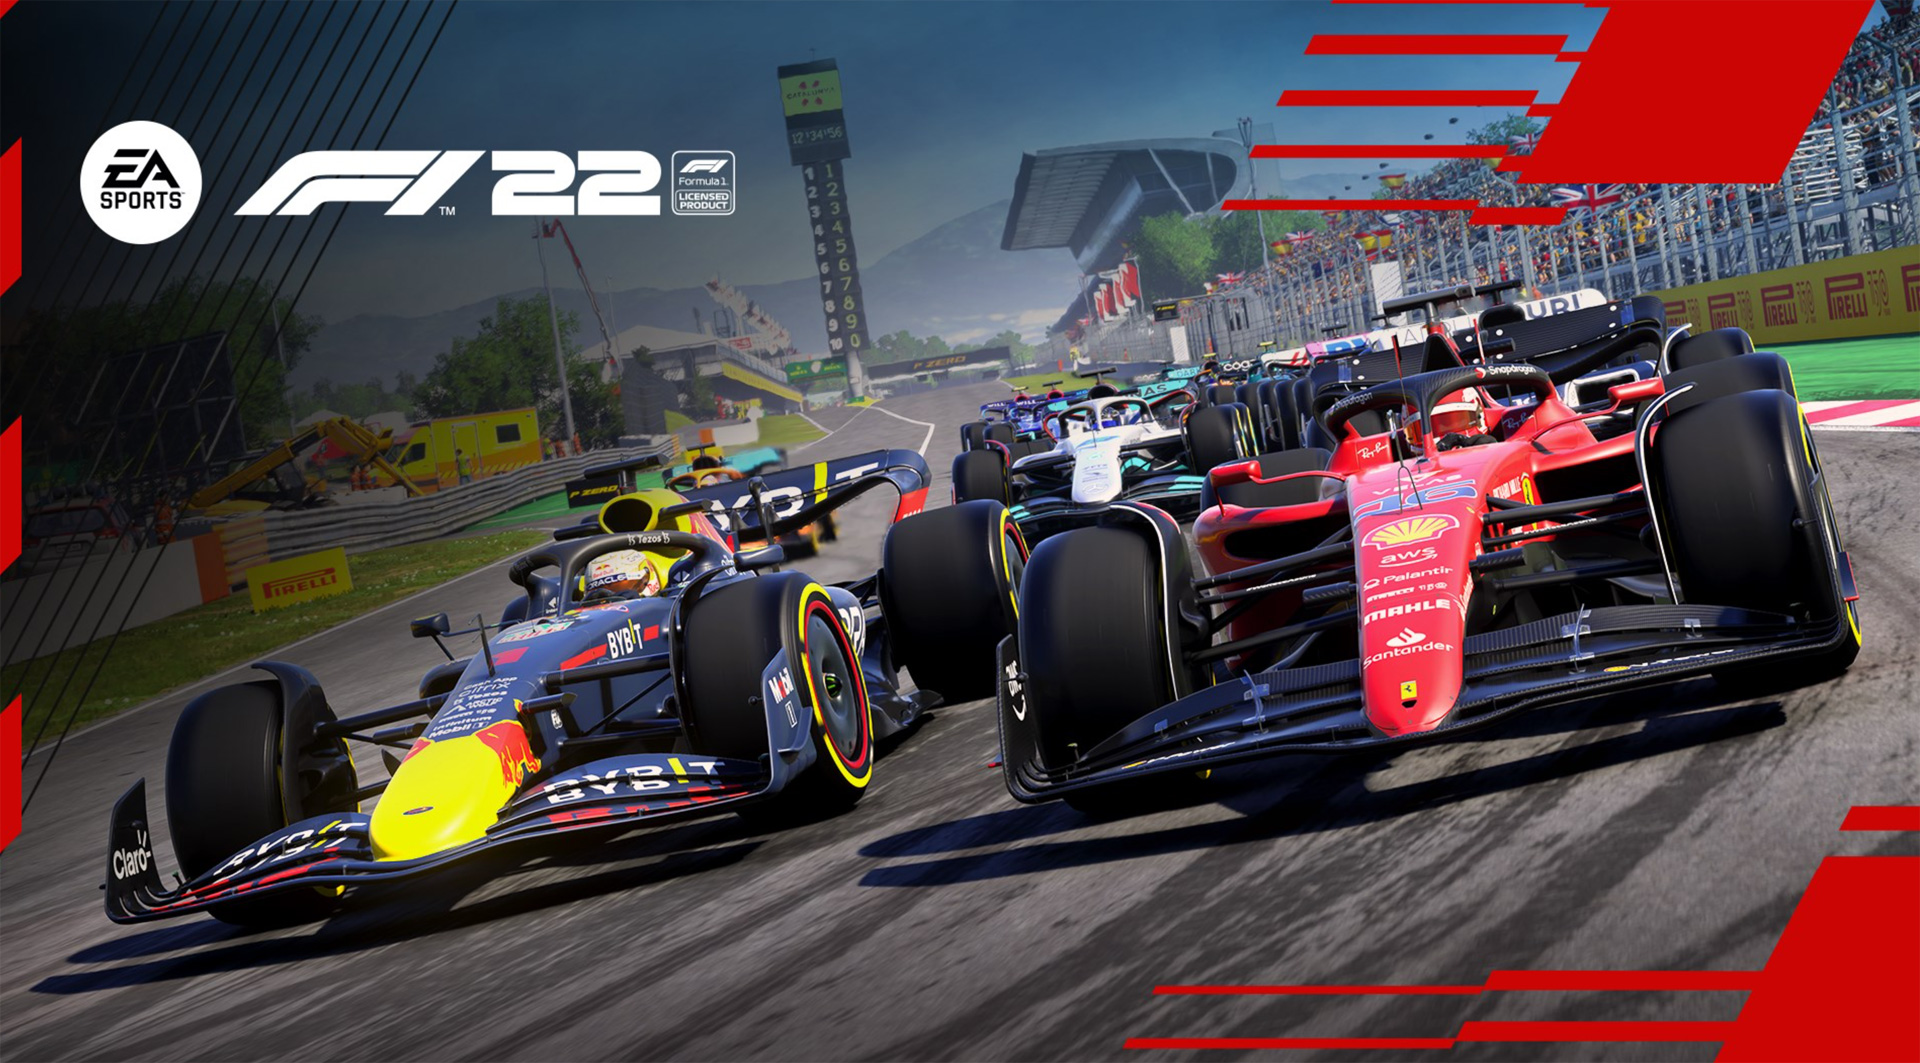 F1 22 trailer went live today. Charles Leclerc appears in a brand-new clip that Codemasters, the game's creator, posted to commemorate the release.